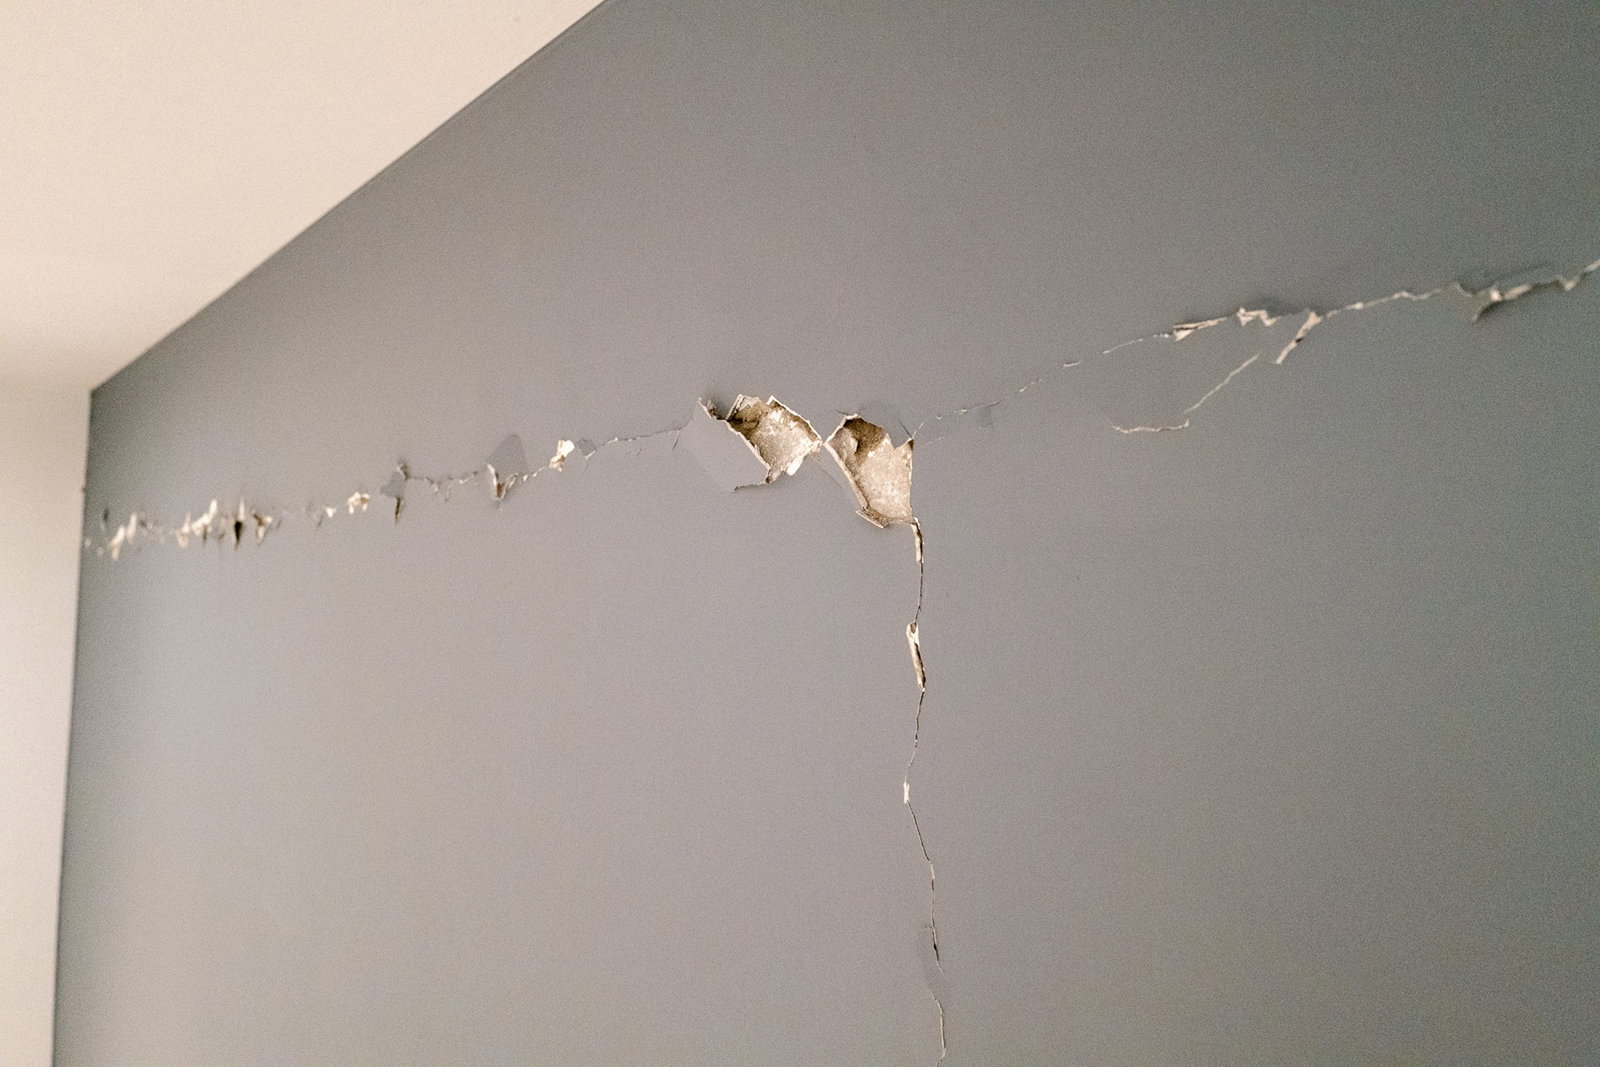 A crack appears in a grey wall with some installation showing.